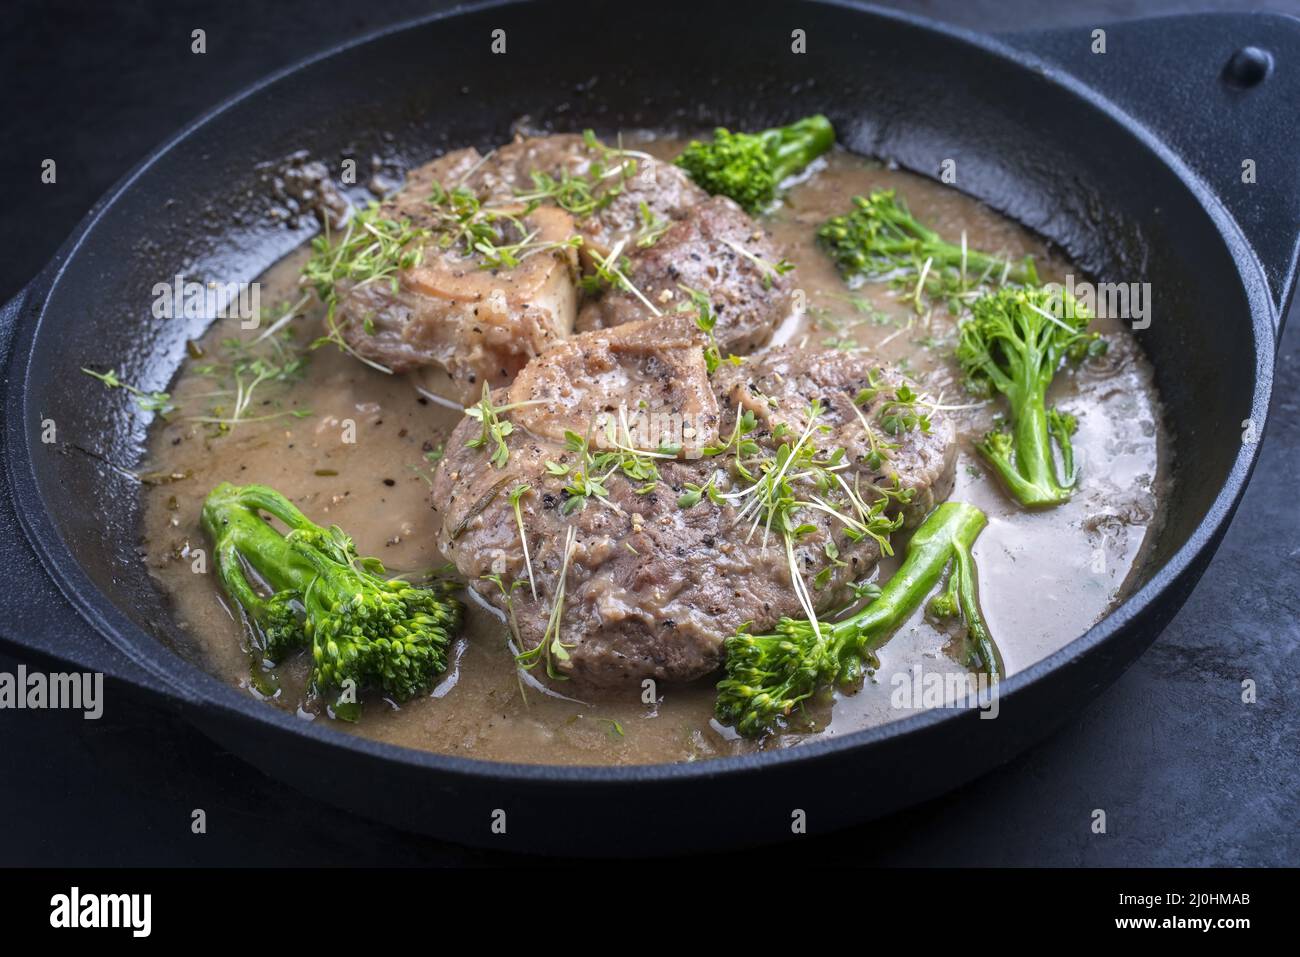 Modern style traditional braised Italian ossobuco alla Milanese with baby broccoli and herb in white wine meat sauce served in a Stock Photo